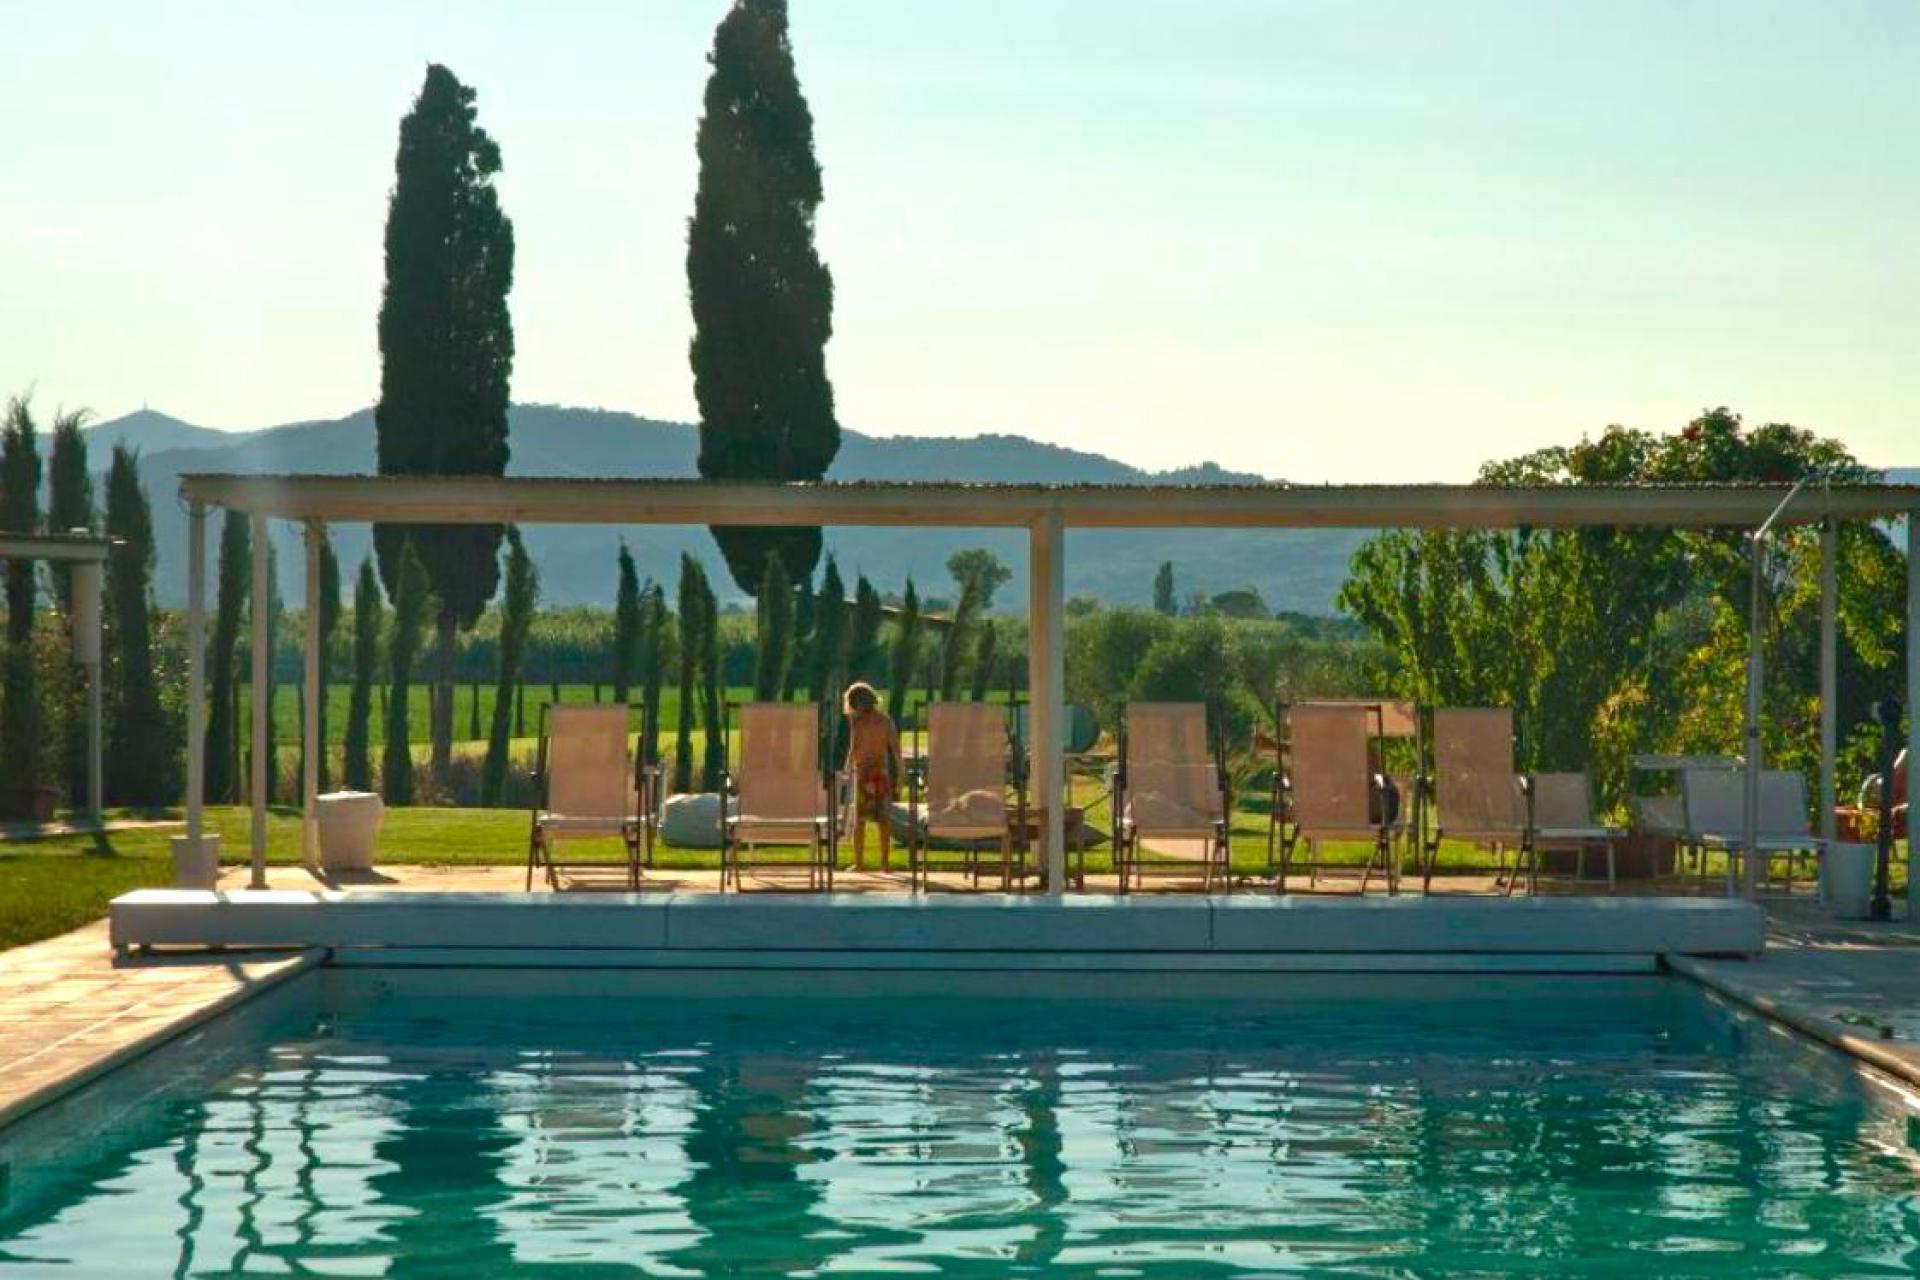 Luxury agriturismo in Tuscany near the beach